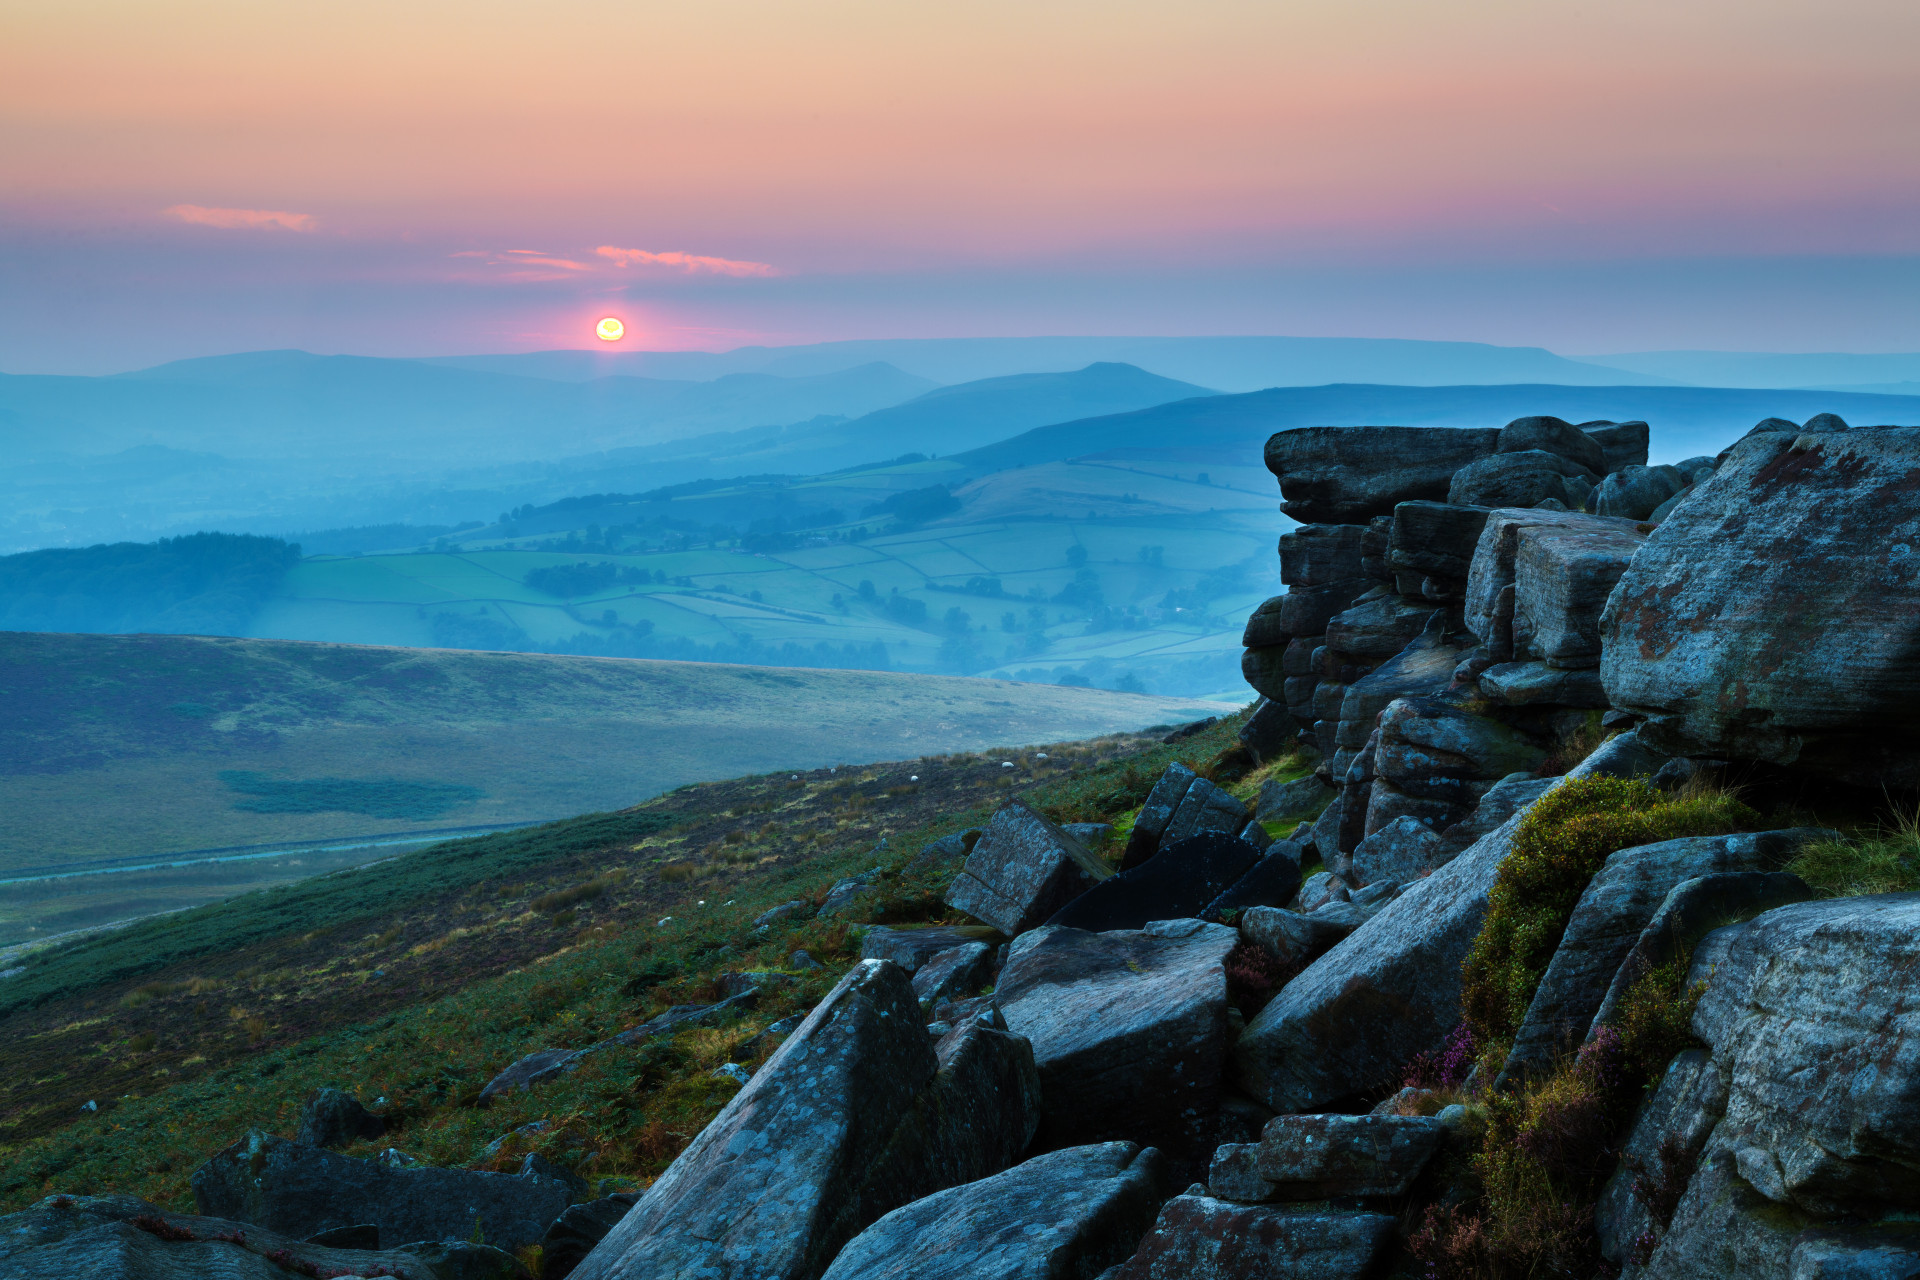 The route will also take you to Stanage Edge, a rock climber's paradise and home to awe-inspiring views.<p><a href="https://www.msn.com/en-us/community/channel/vid-7xx8mnucu55yw63we9va2gwr7uihbxwc68fxqp25x6tg4ftibpra?cvid=94631541bc0f4f89bfd59158d696ad7e">Follow us and access great exclusive content every day</a></p>